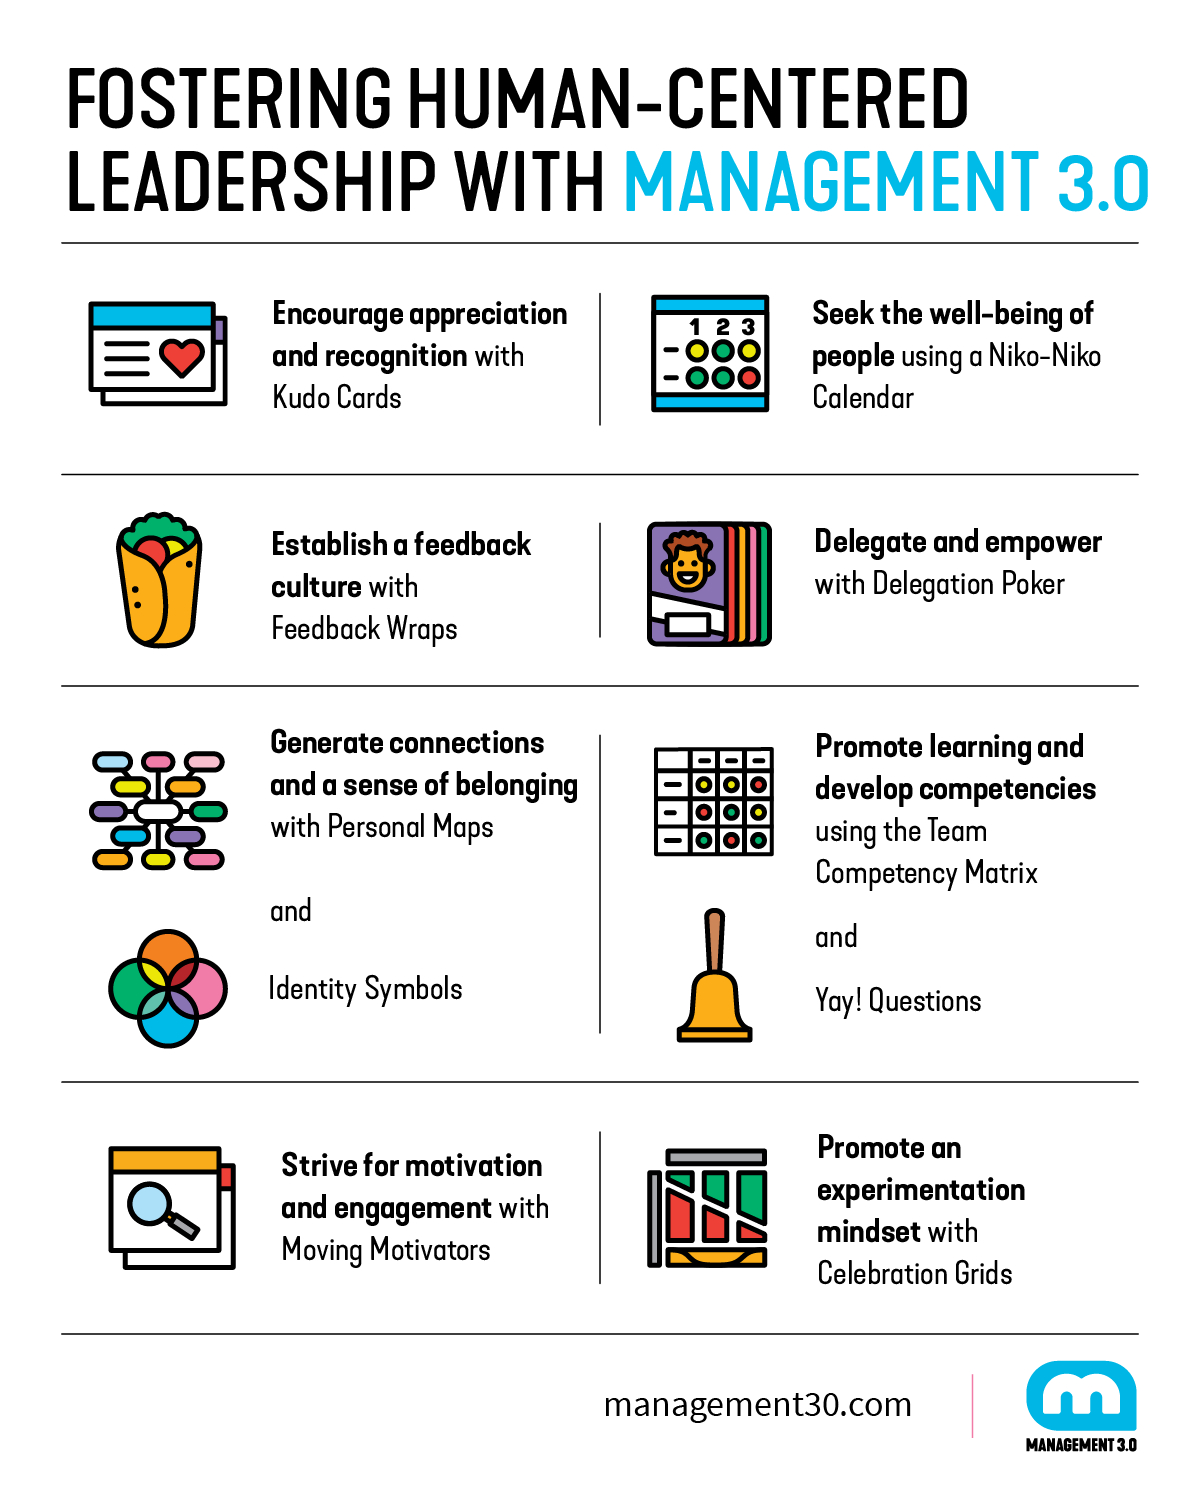 Fostering human-centered leadership with Management 3.0